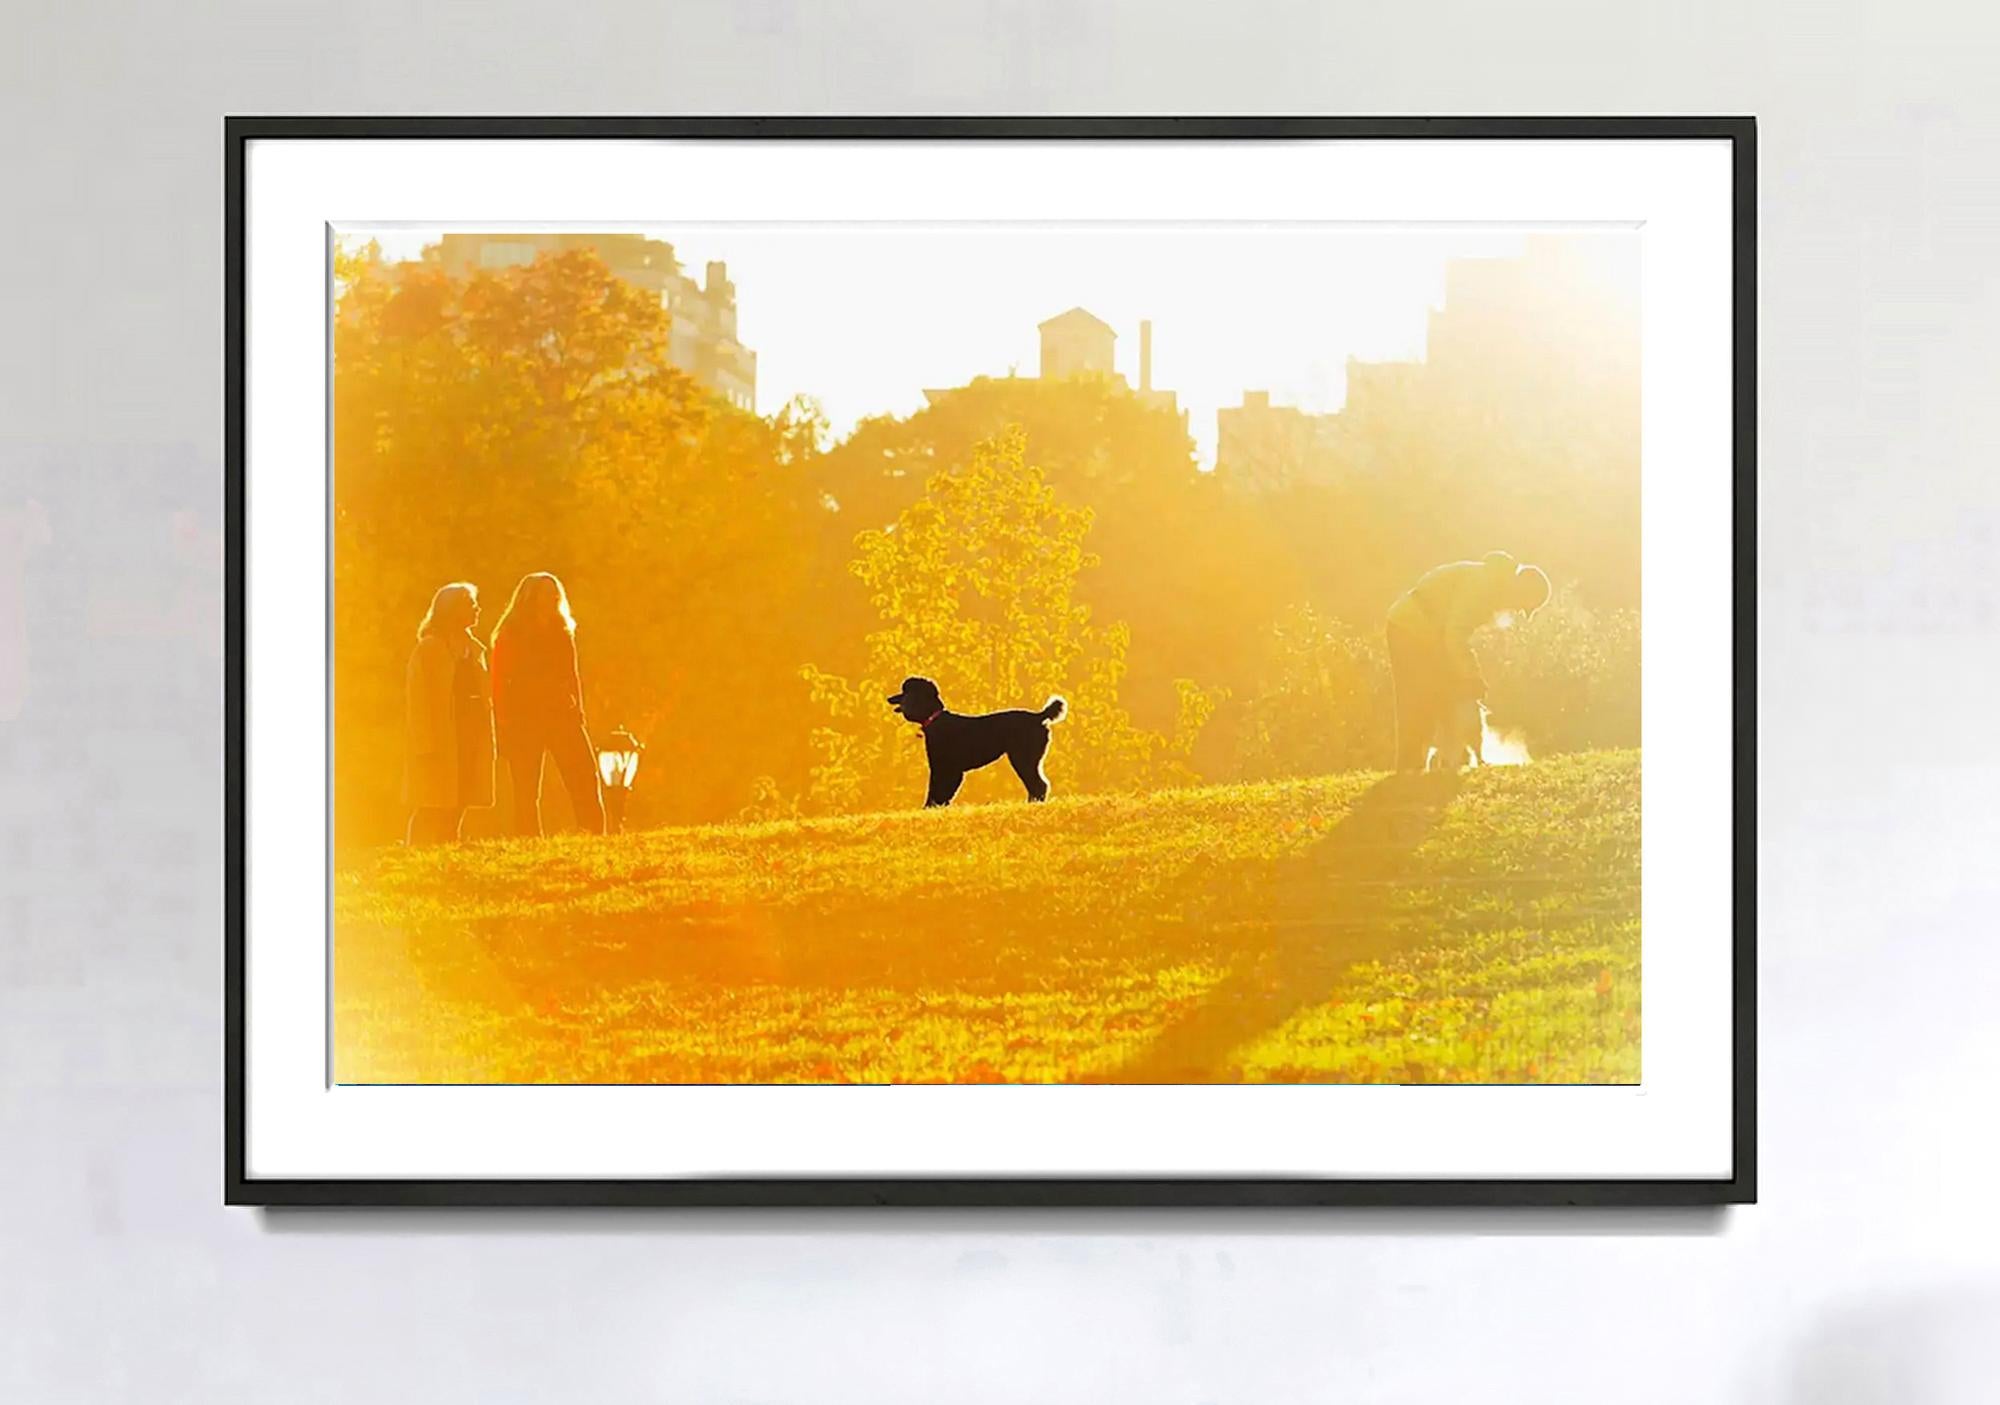 French Poodle Central Park  - Dog in Golden Light - Photograph by Mitchell Funk